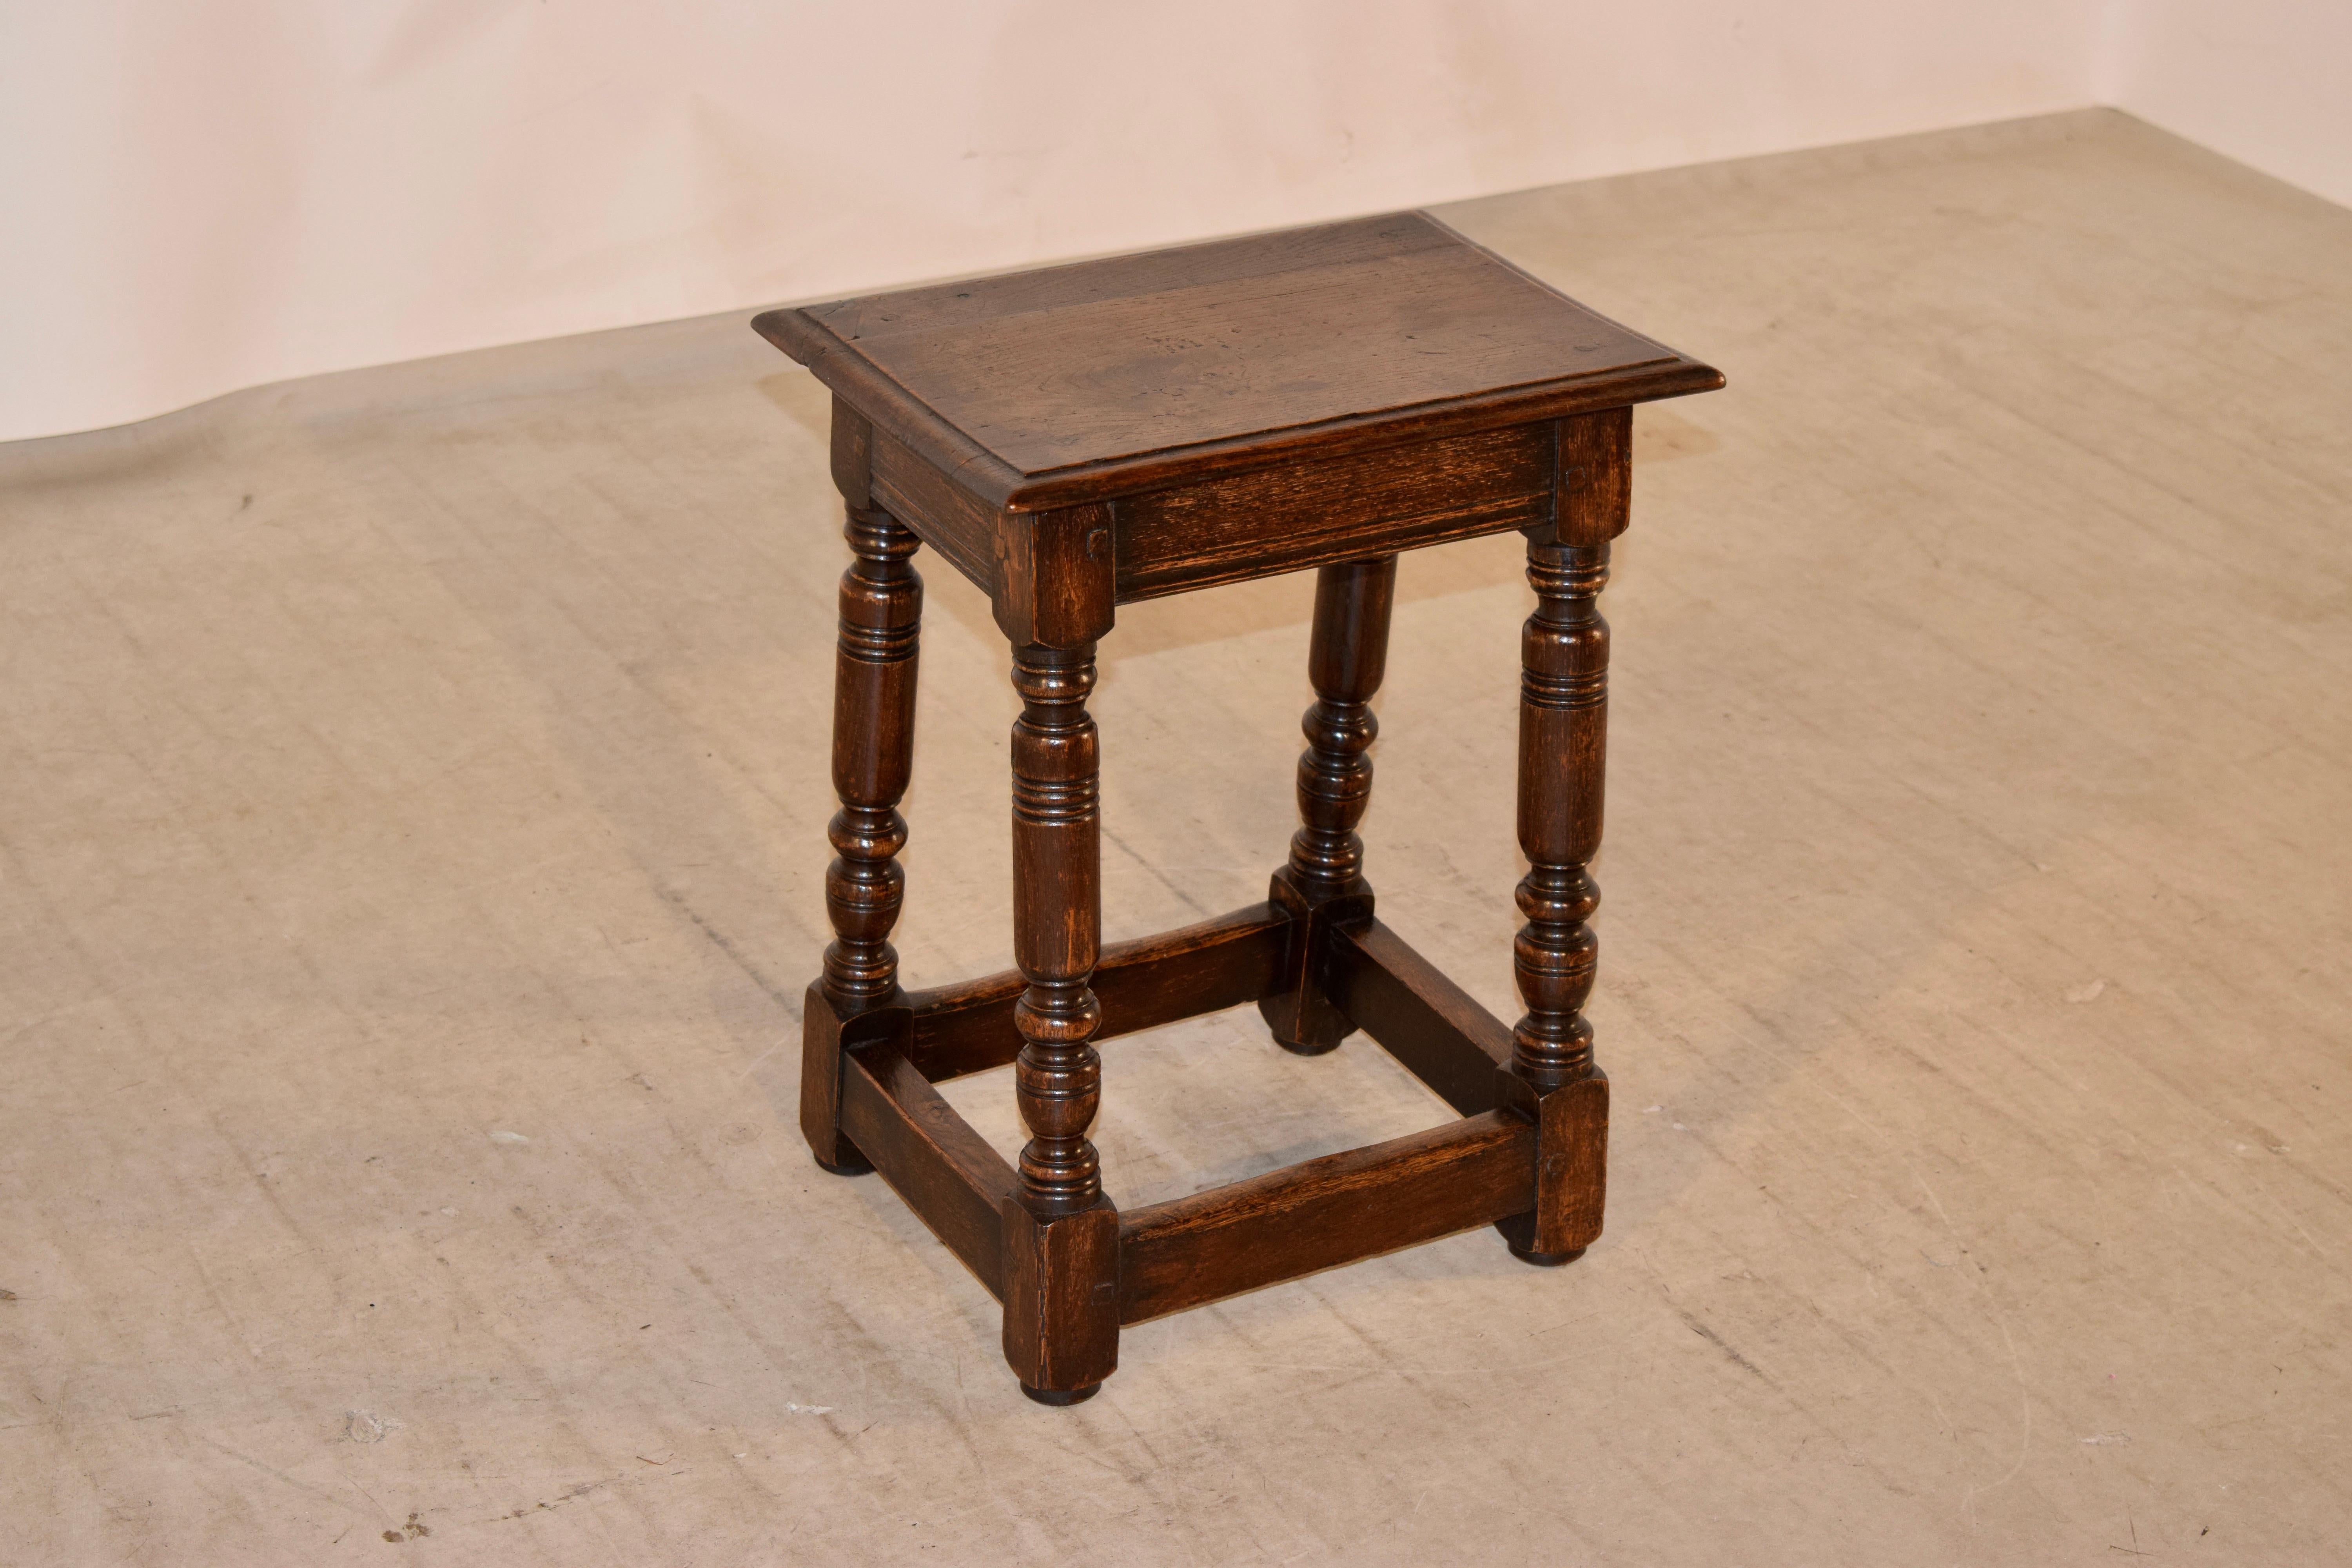 19th century English oak joint stool with a beveled edge around the top following down to a simple apron and nicely hand-turned legs, which are slightly splayed and are joined by simple stretchers.